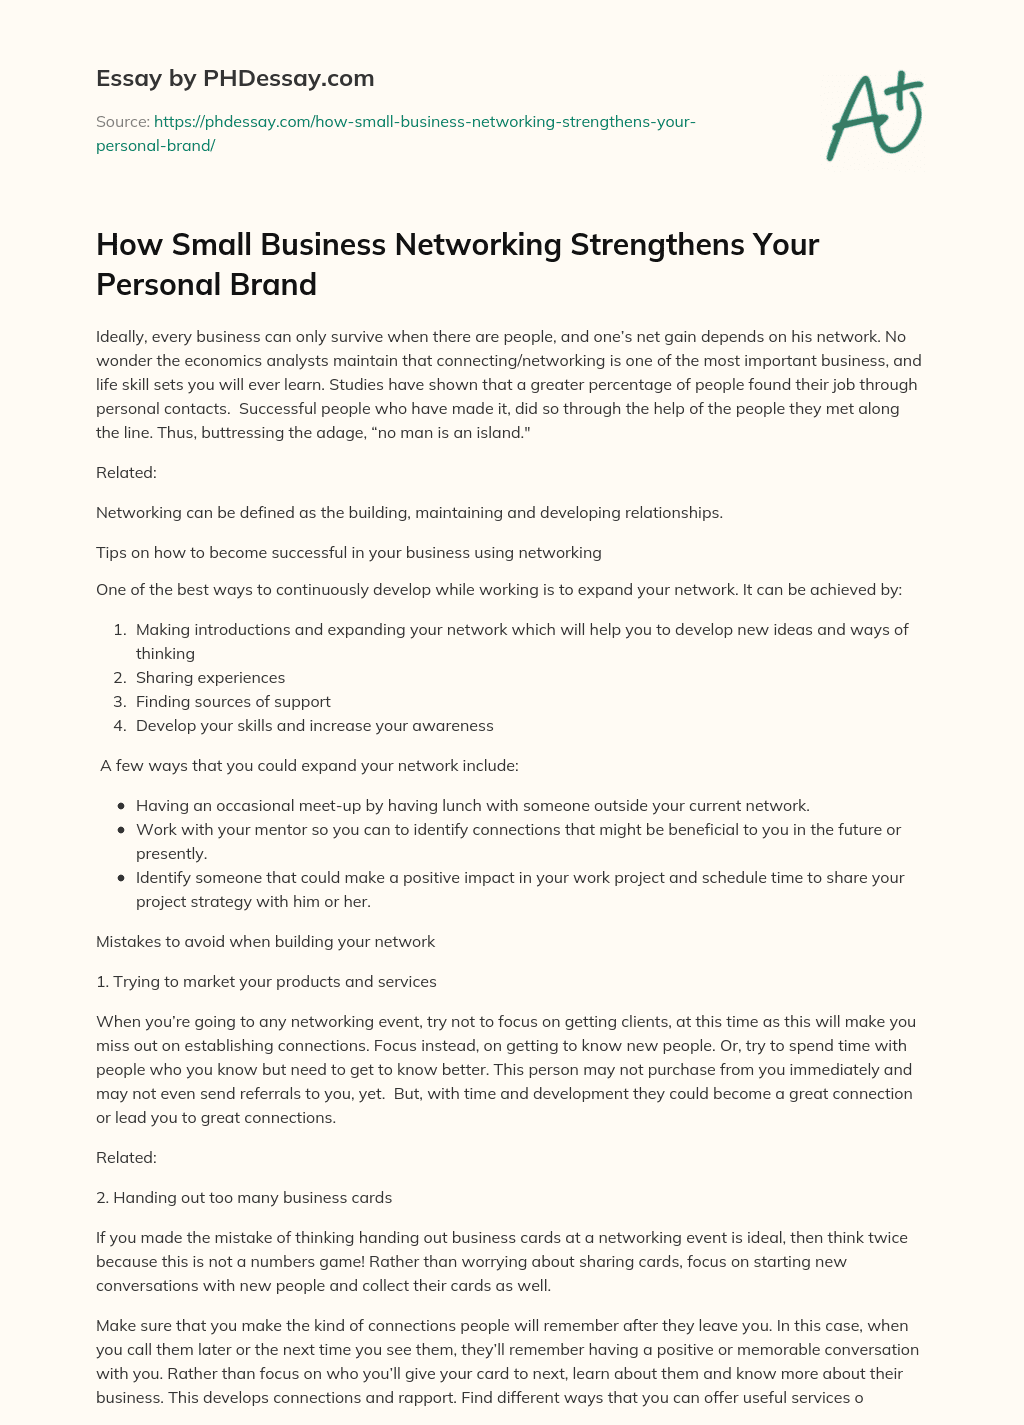 How Small Business Networking Strengthens Your Personal Brand essay